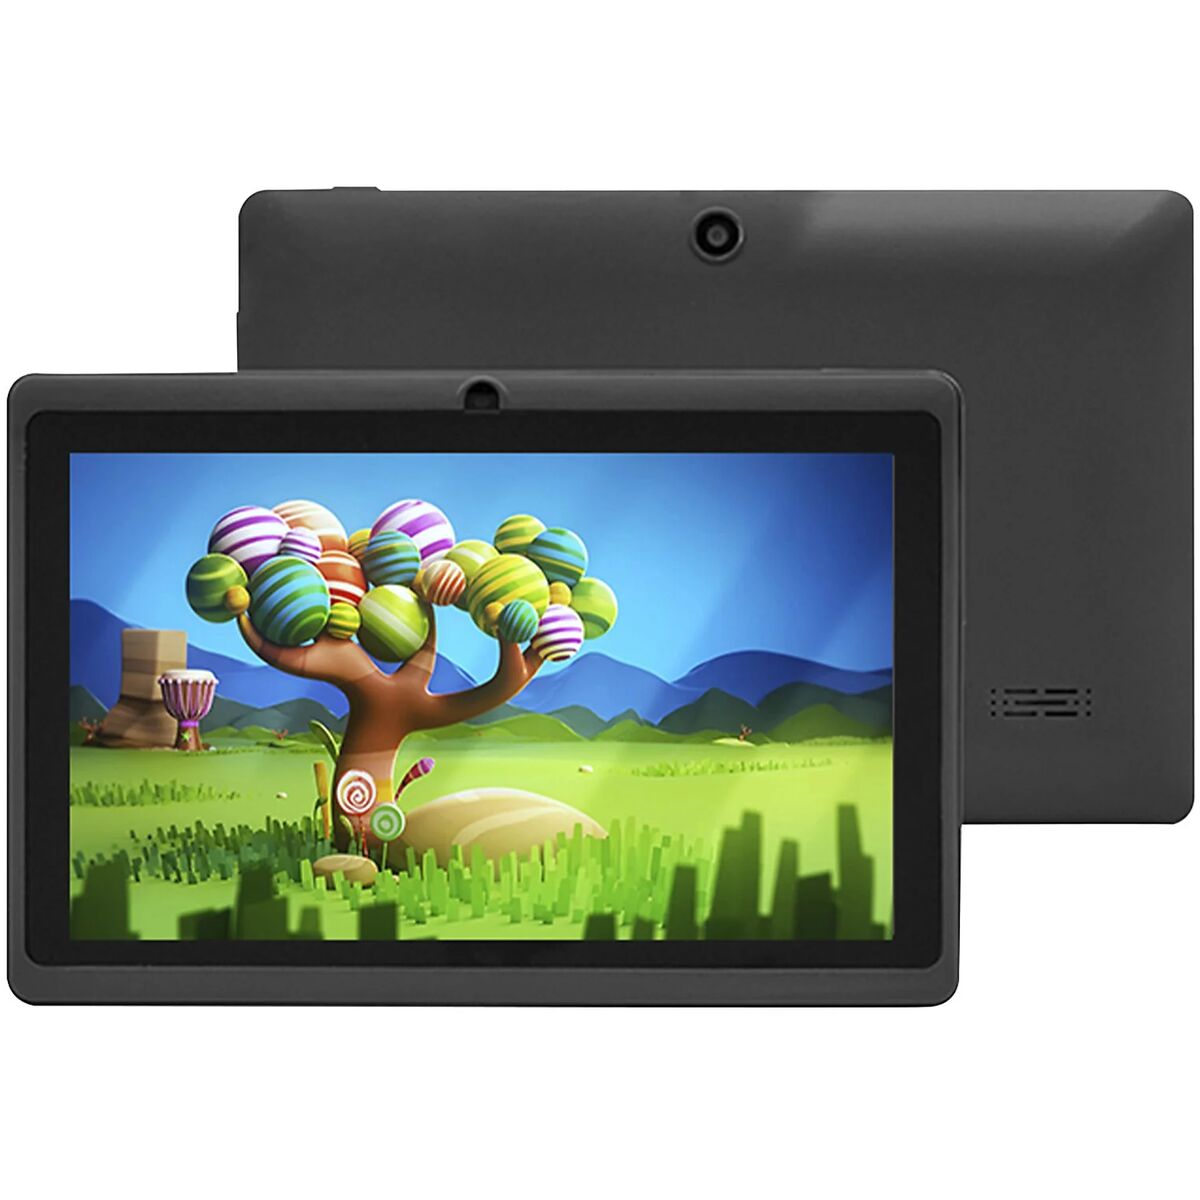 Interactive Tablet for Children K705 Black 32 GB 2 GB RAM 7", BigBuy Tech, Toys and games, Electronic toys, interactive-tablet-for-children-k705-black-32-gb-2-gb-ram-7, Brand_BigBuy Tech, category-reference-2609, category-reference-2617, category-reference-2626, category-reference-t-11190, category-reference-t-11203, category-reference-t-11206, category-reference-t-19663, Condition_NEW, entertainment, para los más peques, Price_100 - 200, telephones & tablets, vuelta al cole, RiotNook